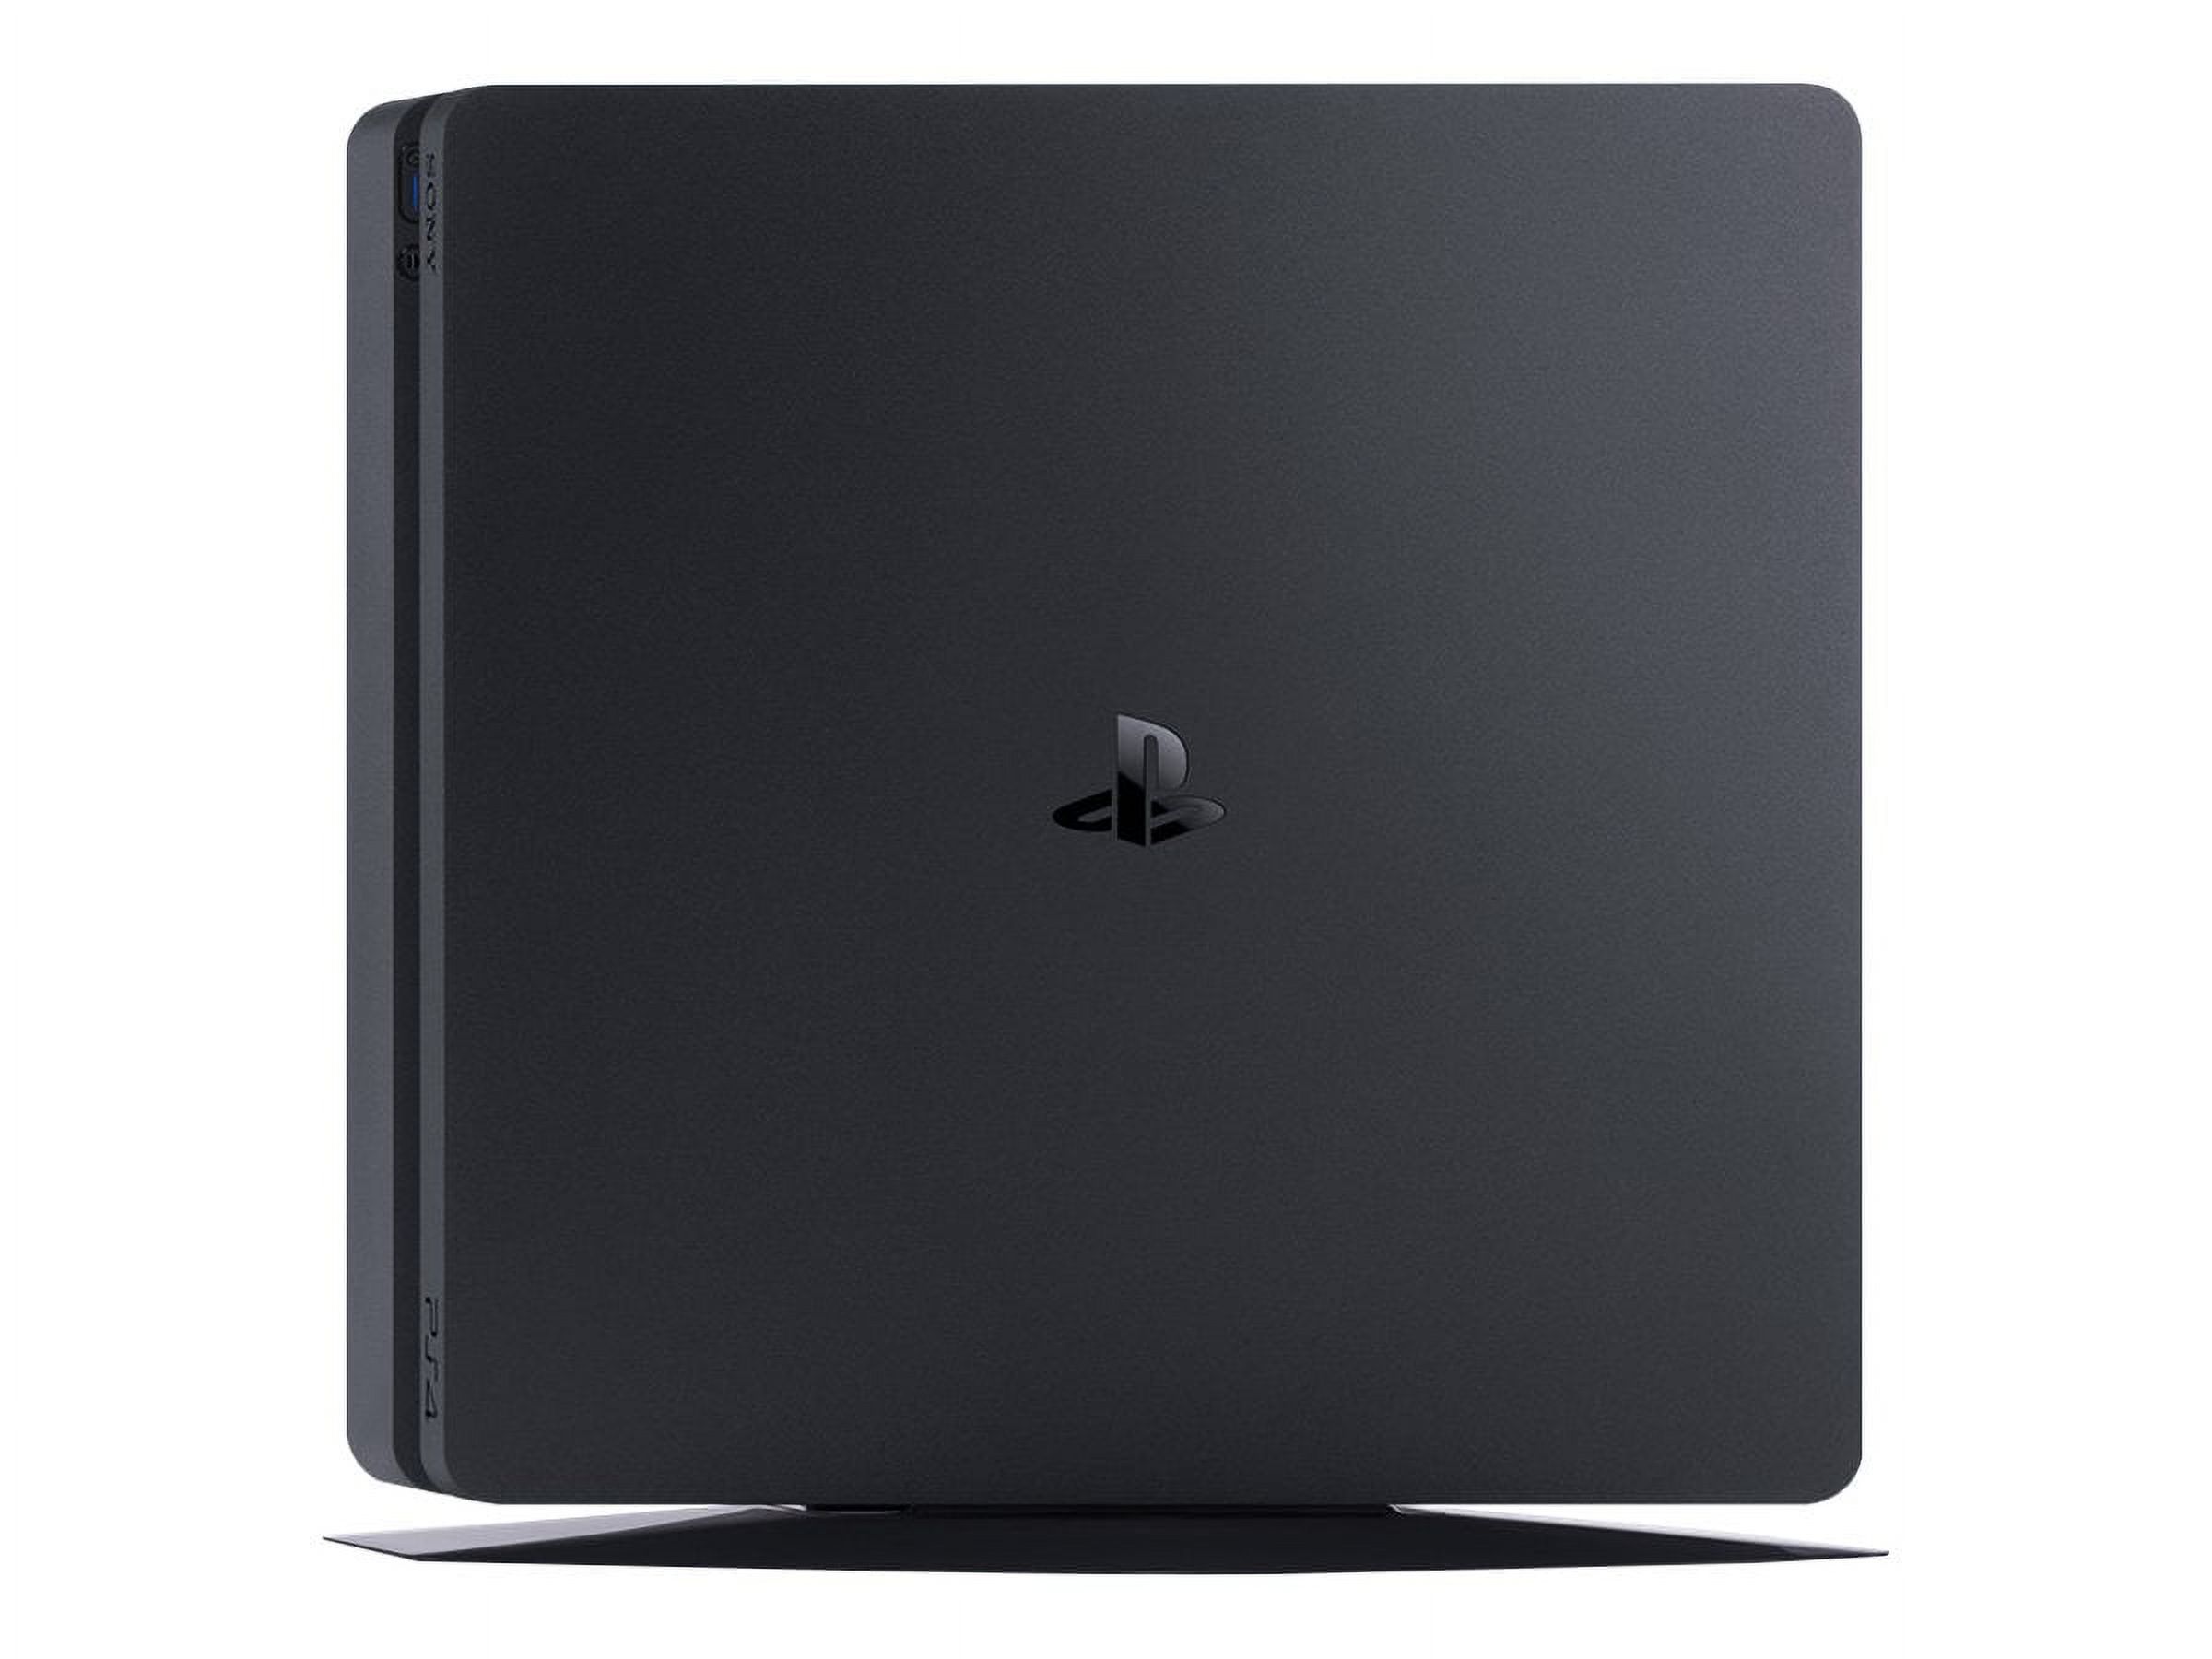 Sony PlayStation 4 Slim 500GB Gaming Console, Black, CUH-2115A - image 4 of 7